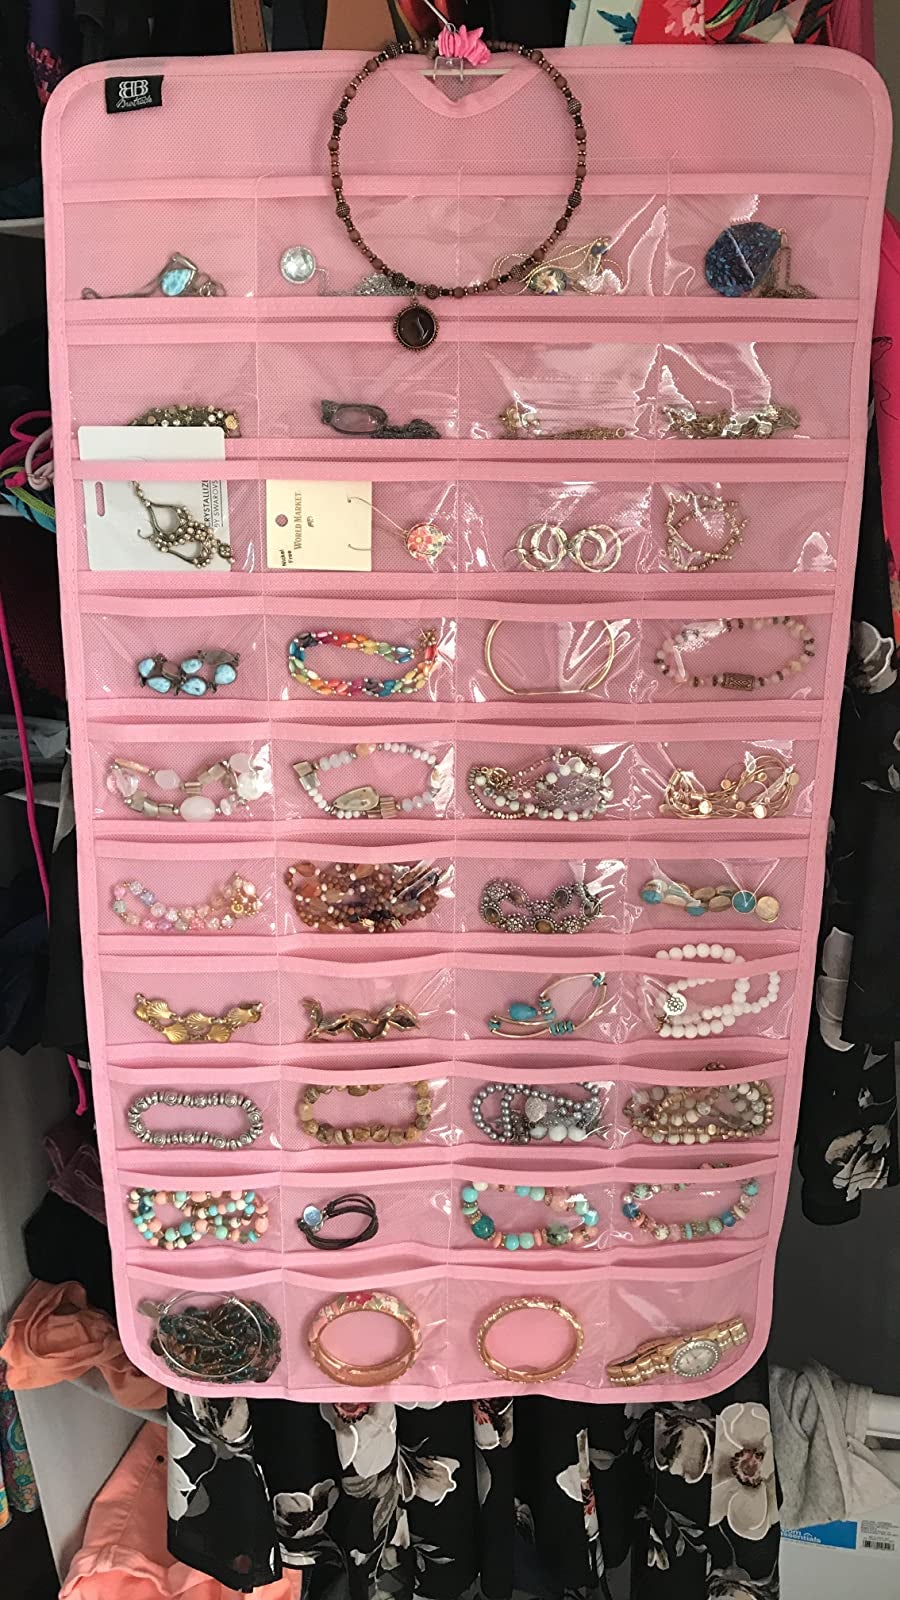 reviewer's pink hanging jewelry organizer hanging up in a closet